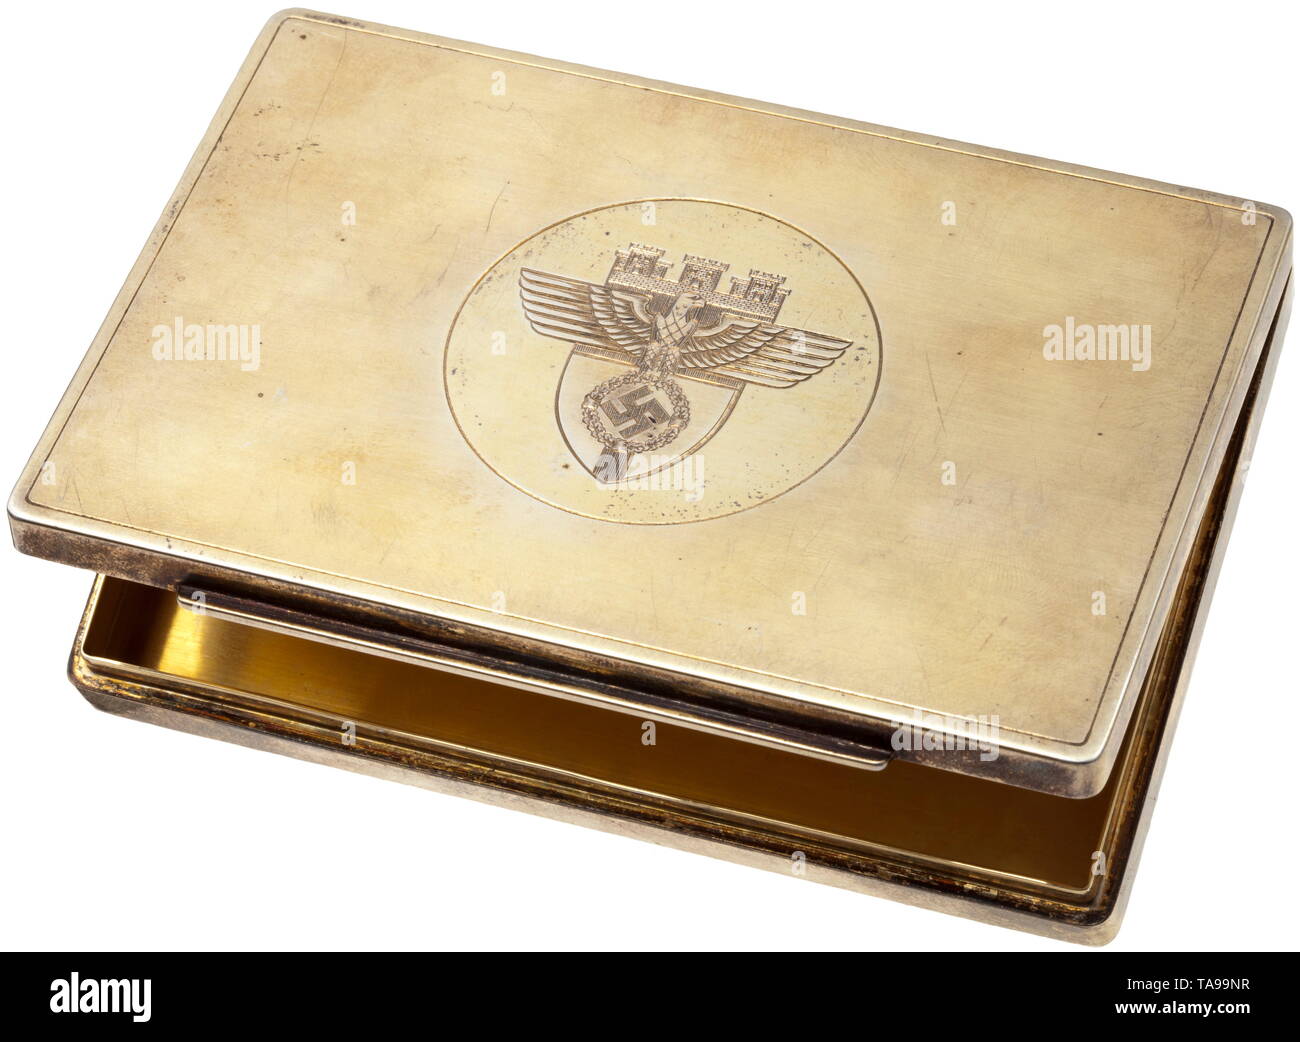 Erich Koch (1896 - 1986), Gauleiter of the NSDAP in East Prussia - a silver cigarette case presented to Gauleiter 'Oberdonau' August Eigruber Personal birthday present for Eigruber's 35th birthday on 16 April 1942. Gold-plated silver cigarette case (.925). The lid with engraved coat of arms of the 'Gau Ostpreußen' with national eagle. The inside of the lid engraved with facsimile signature 'Erich Koch' and date '16.4.42'. The lateral rim punched with silver hallmark and jeweller's mark of master goldsmith Prof. Herbert Zeitner. Dimensions 7.5 x 11.5 x 1.5 cm, weight circa 2, Editorial-Use-Only Stock Photo